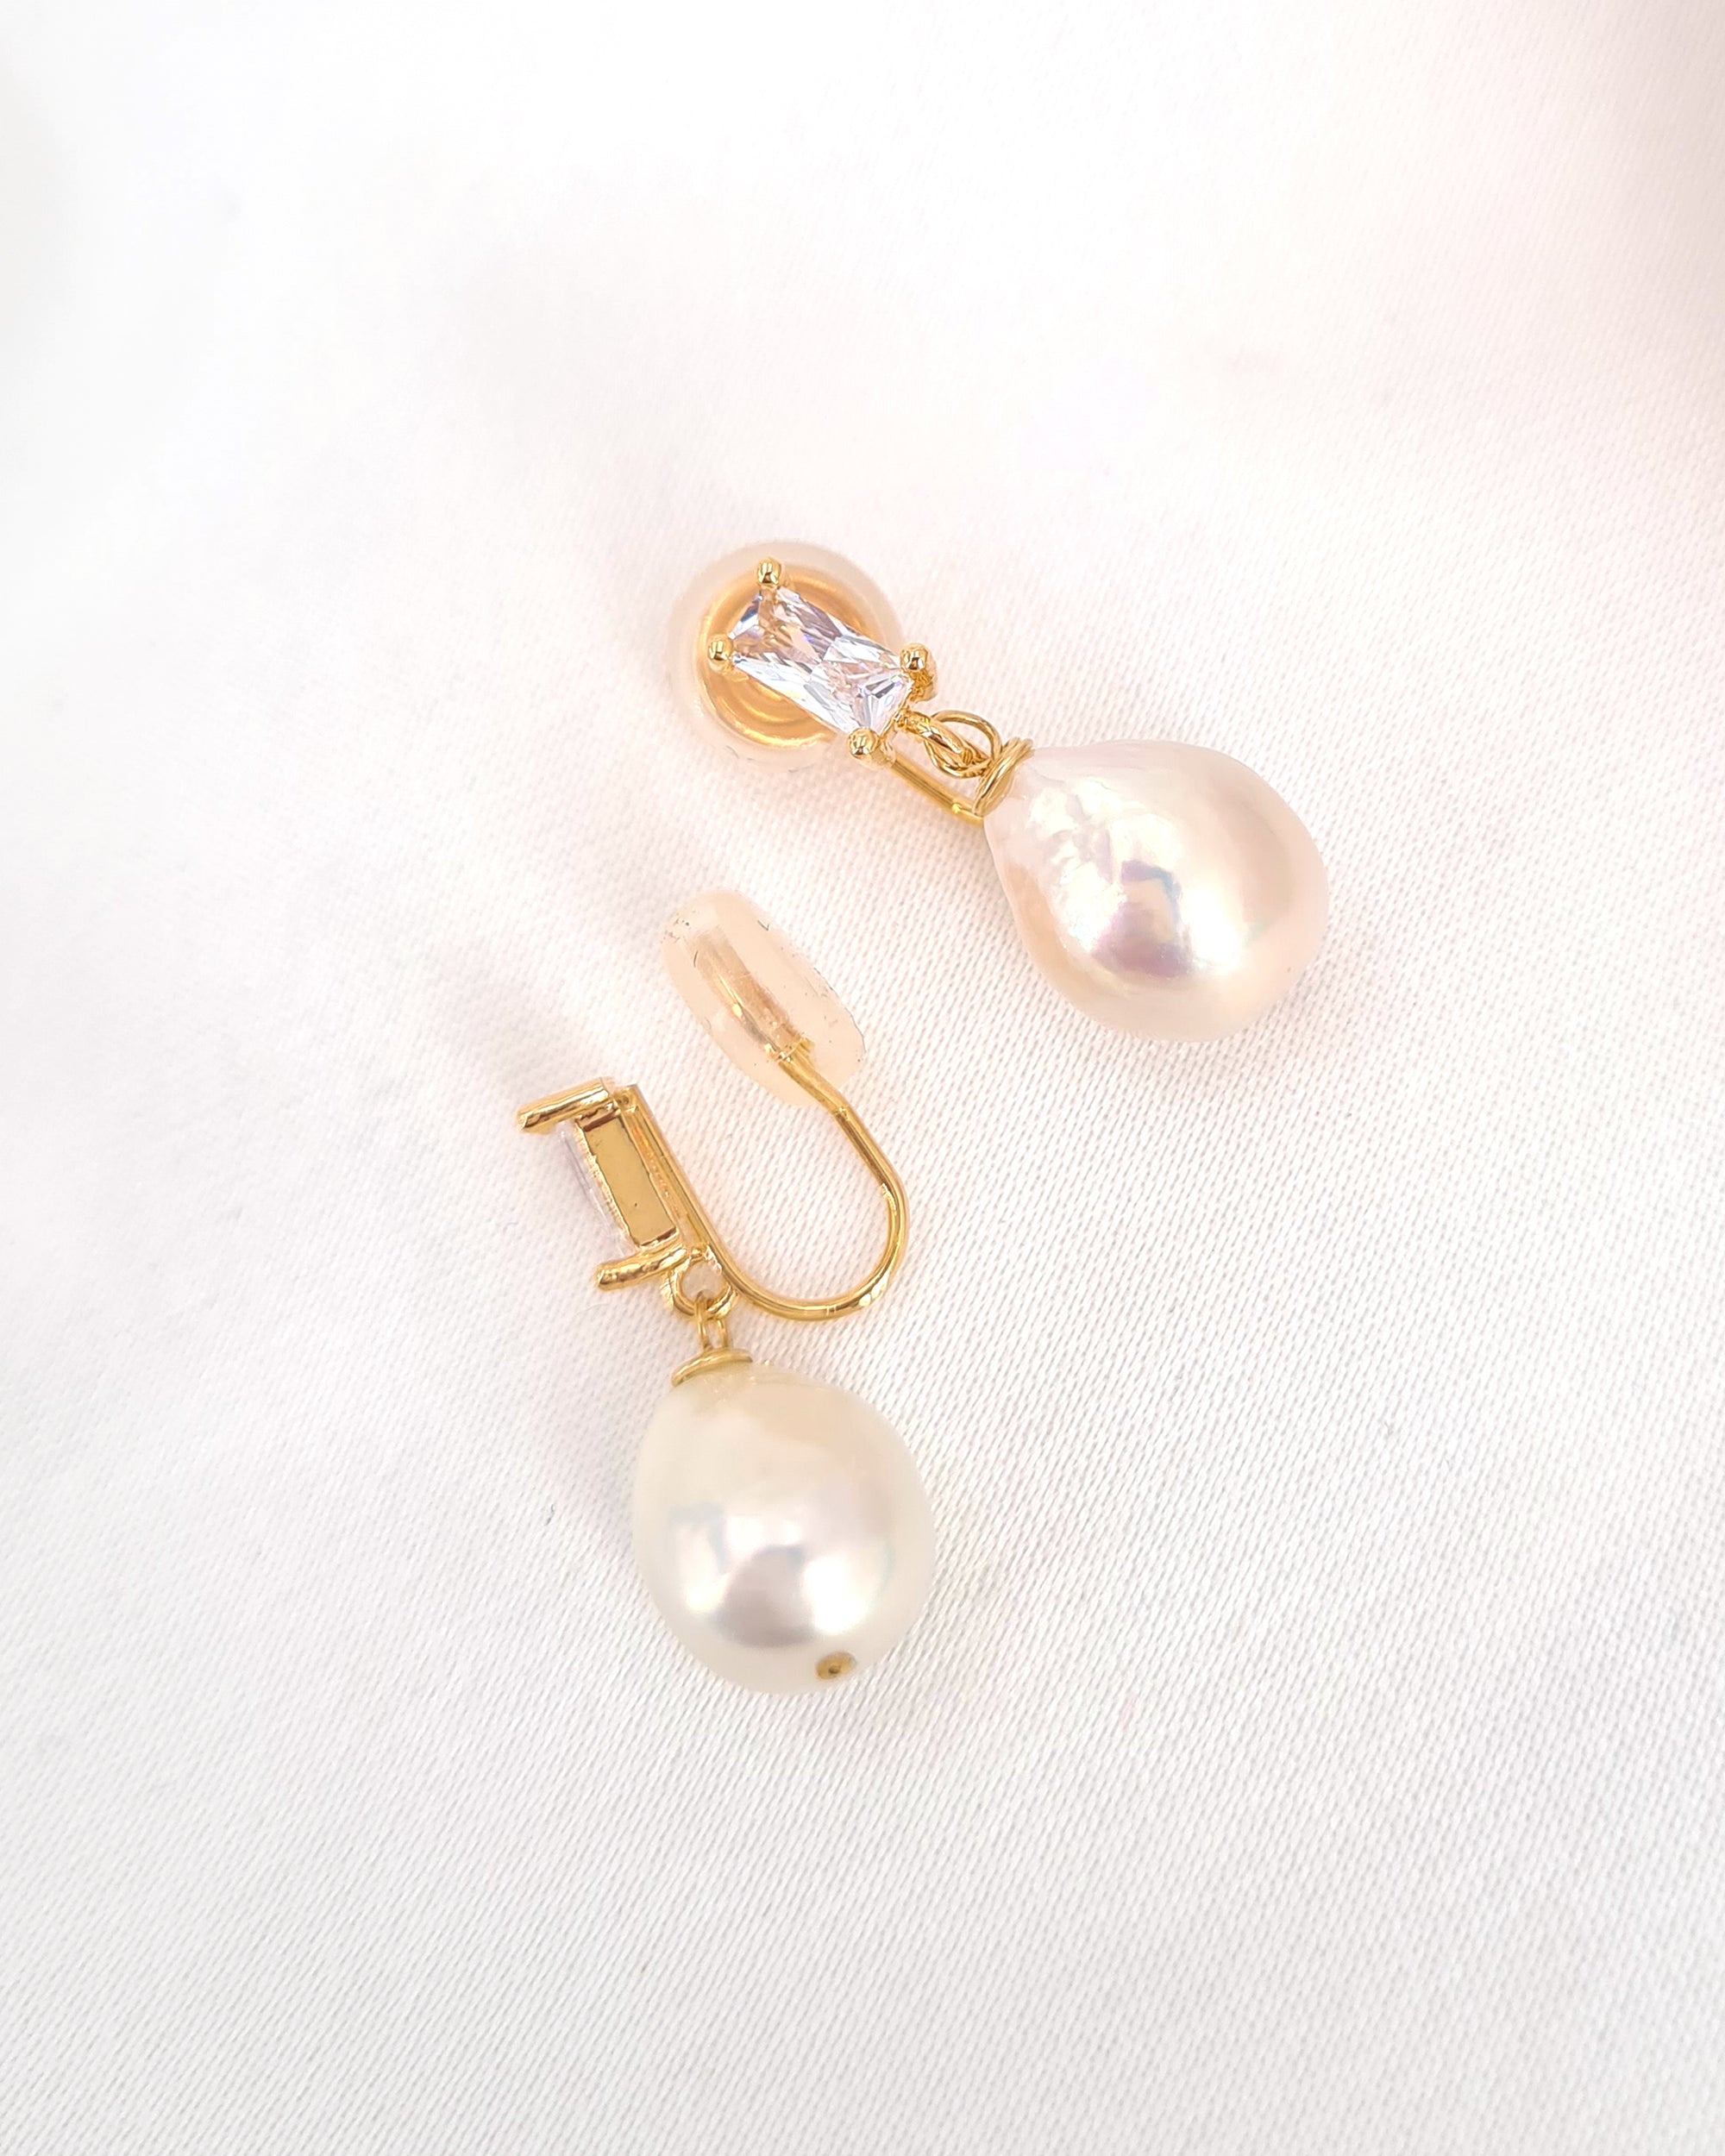 Clip-on Earrings with Edison Baroque Metallic White Pearls | Timeless Pearl Jewelry | Singapore